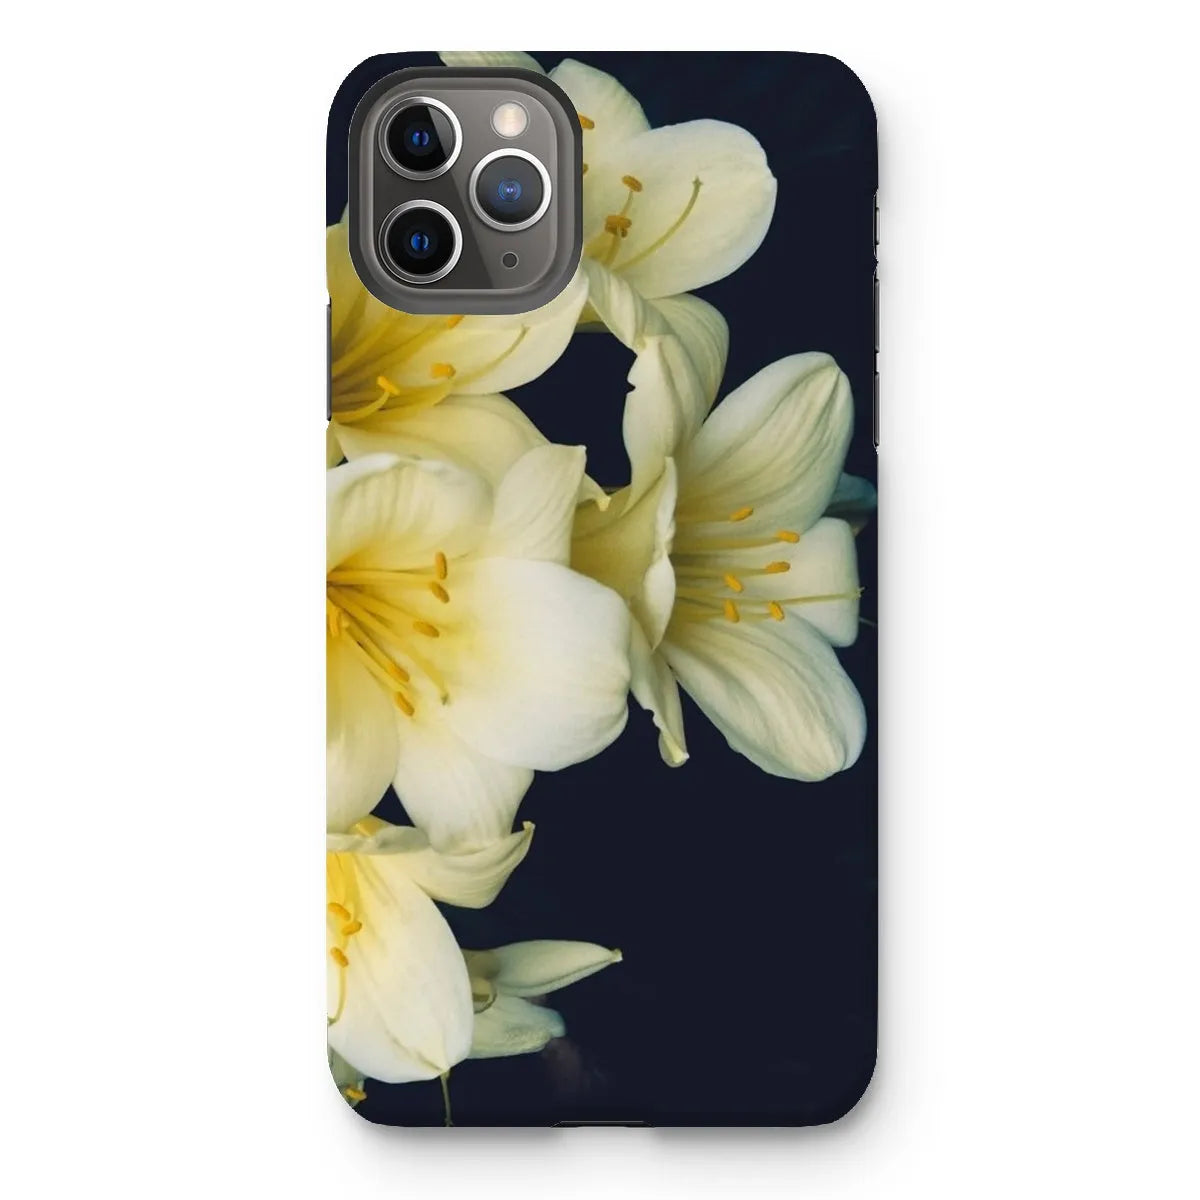 Flower Power Too Tough Phone Case - Iphone 11 Pro Max / Matte - Mobile Phone Cases - Aesthetic Art